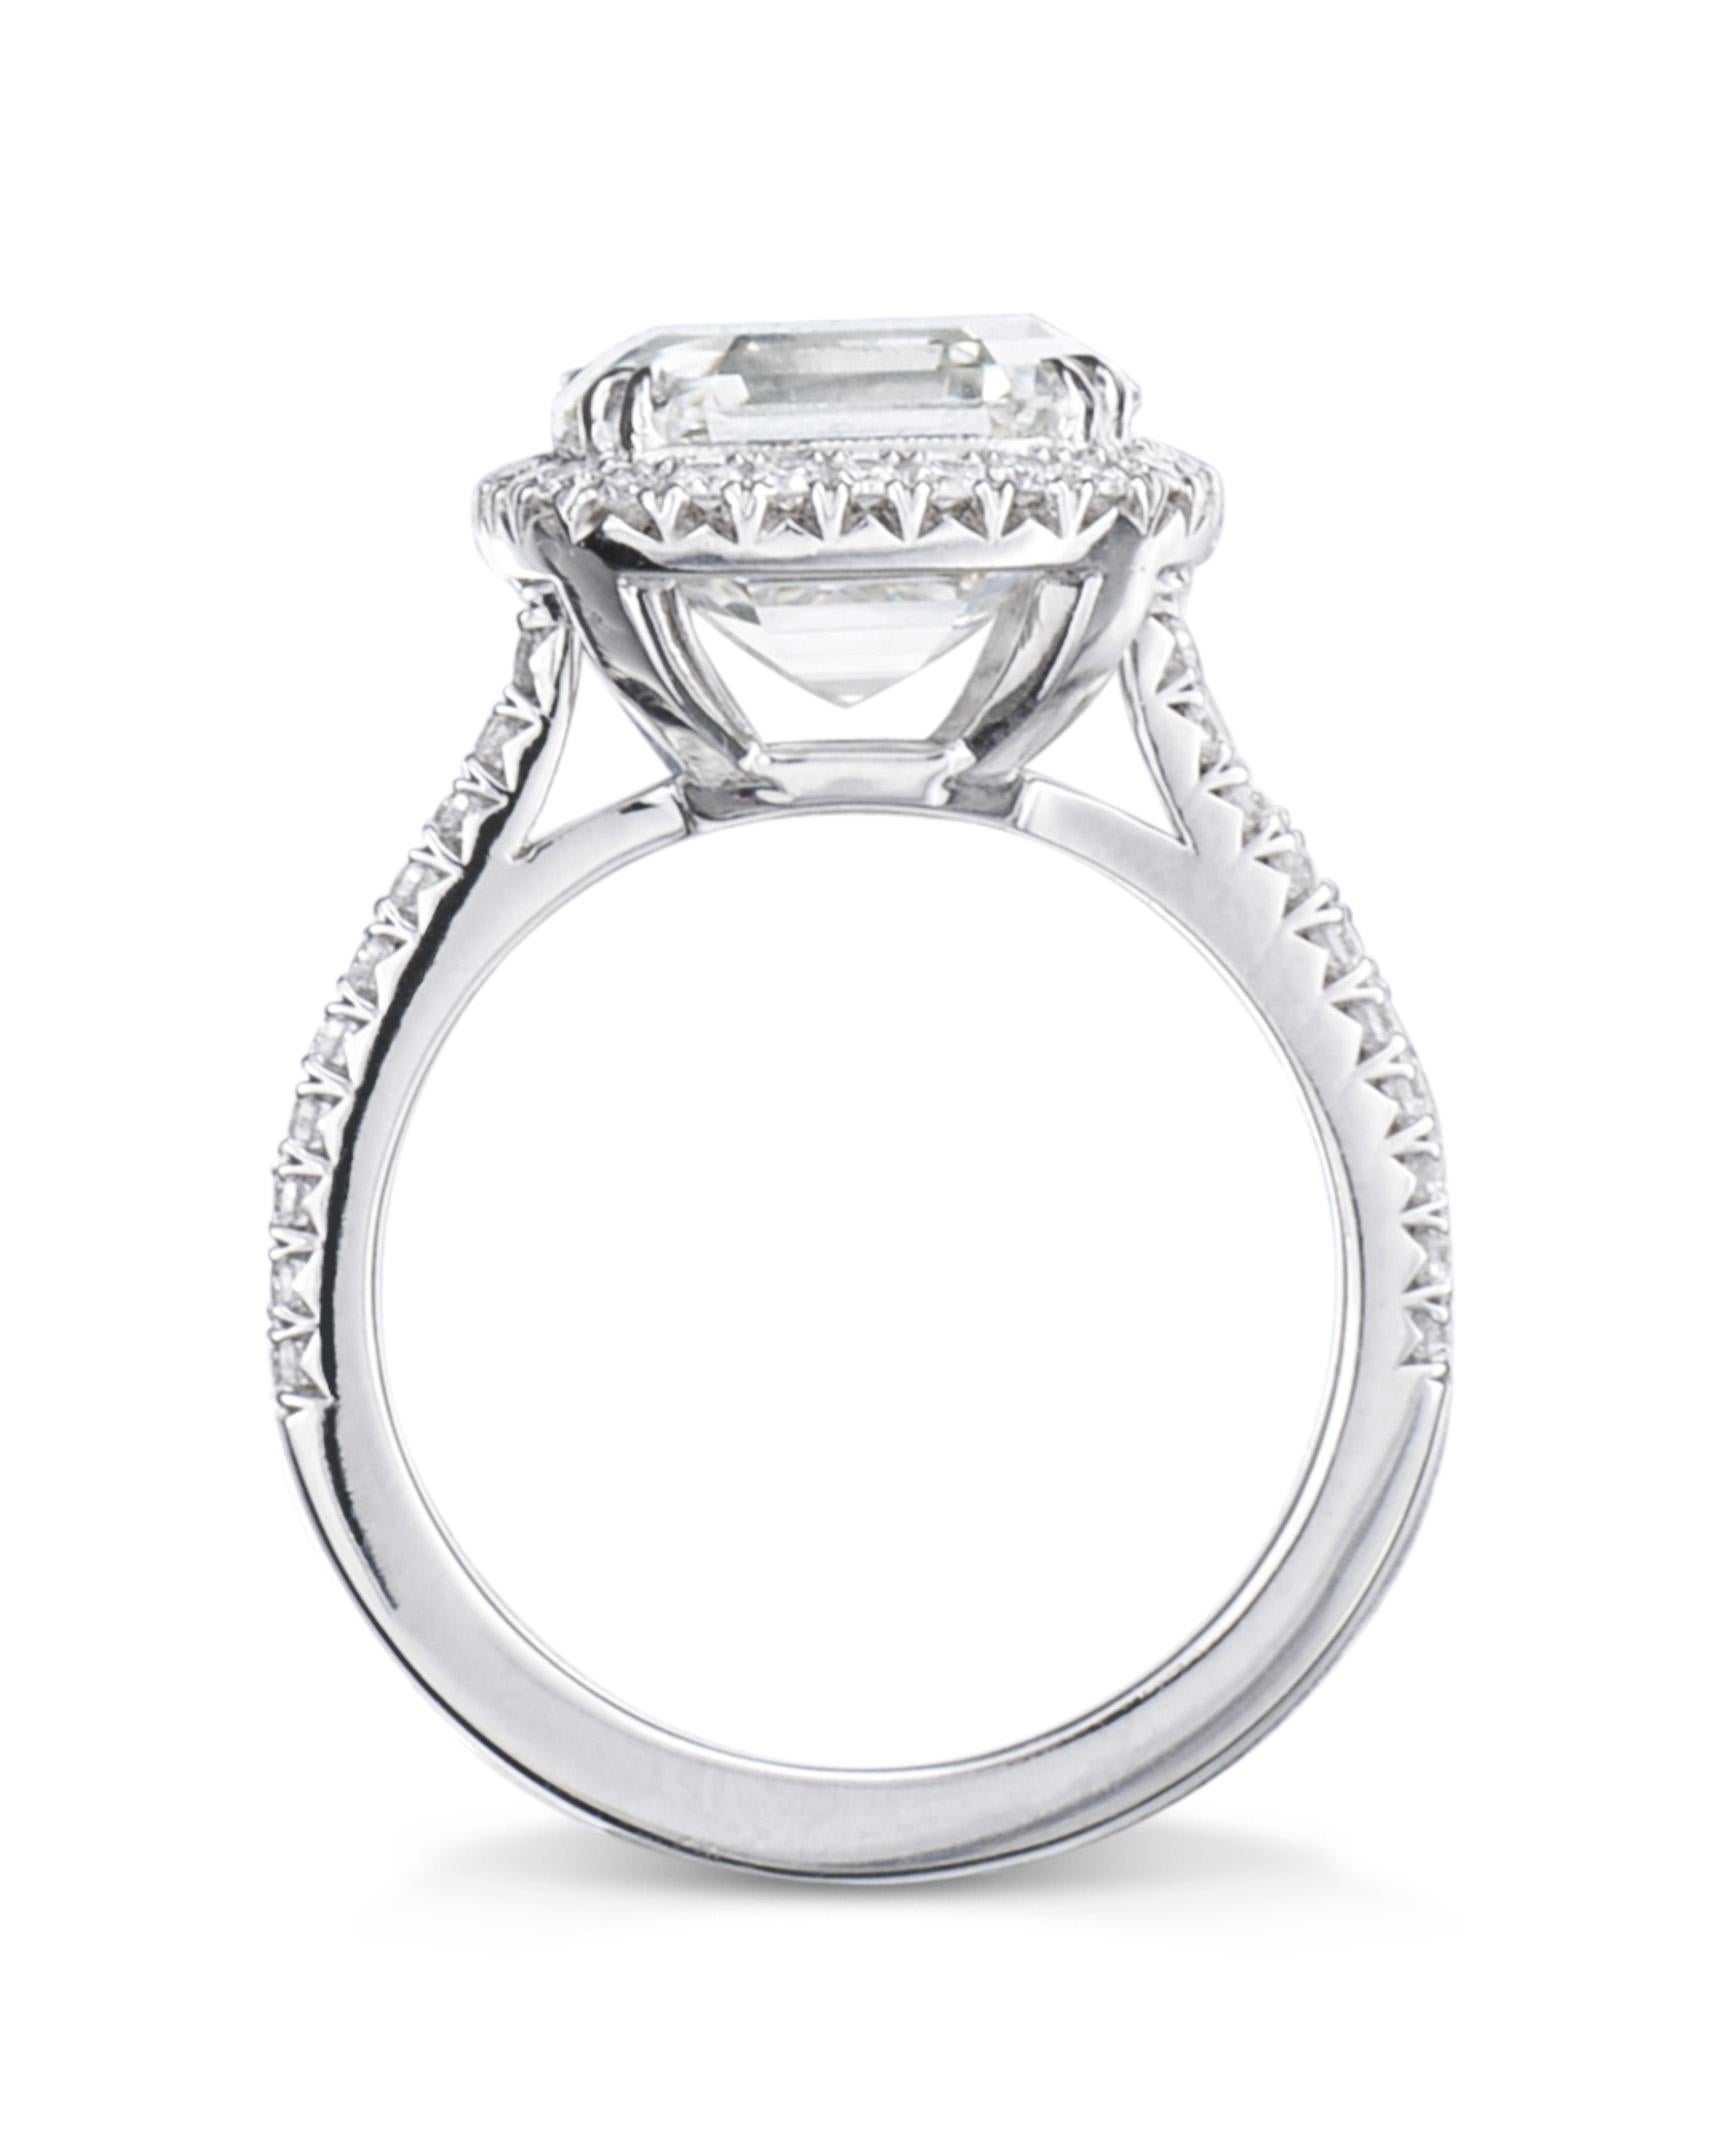 2.00 Carat Asscher Cut GIA Diamond Engagement Ring 950 Platinum Setting In New Condition For Sale In Tarzana, CA